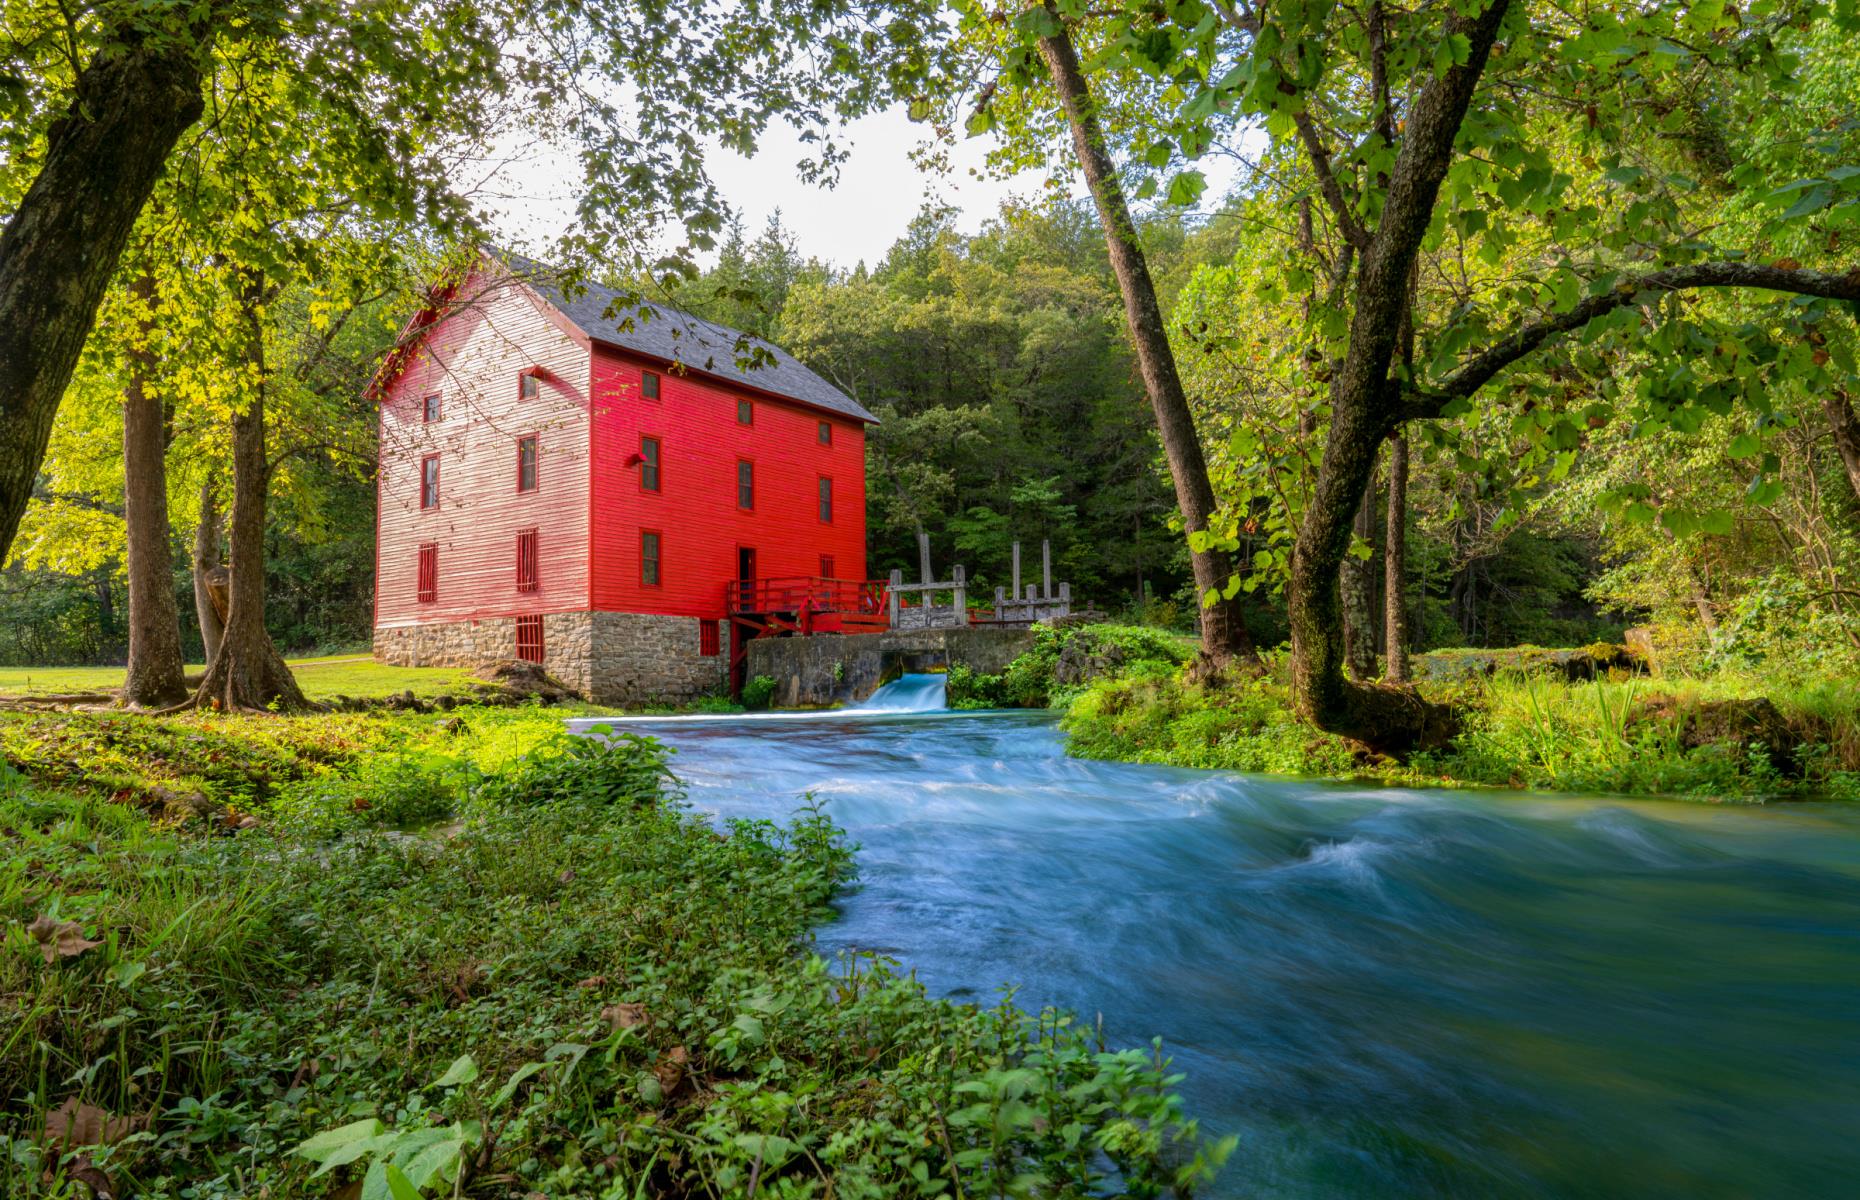 <p>With all of the water flowing around the Ozarks, it’s not surprising that there's a number of historic mills scattered around the region. Mills like the Rockbridge Mill (built in 1865 after the original structure burnt down in the Civil War), the picturesque Alley Mill and the bright red Hodgson Mill are all favorites of photographers and Instagrammers. Most of the mills are no longer in operation, but many welcome visitors and some offer tours.</p>